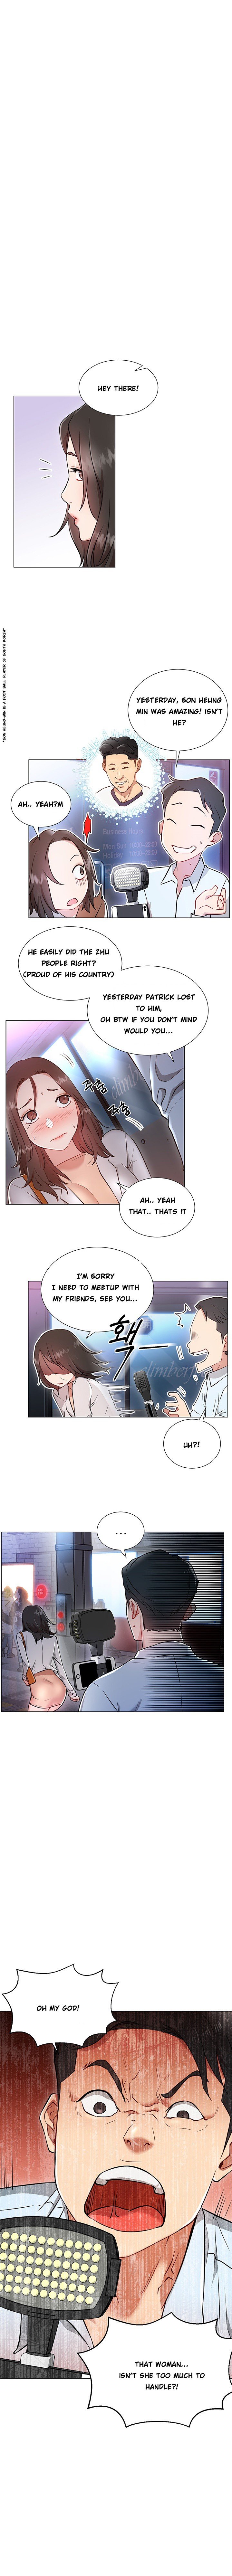 do-you-want-to-collab-chap-3-9